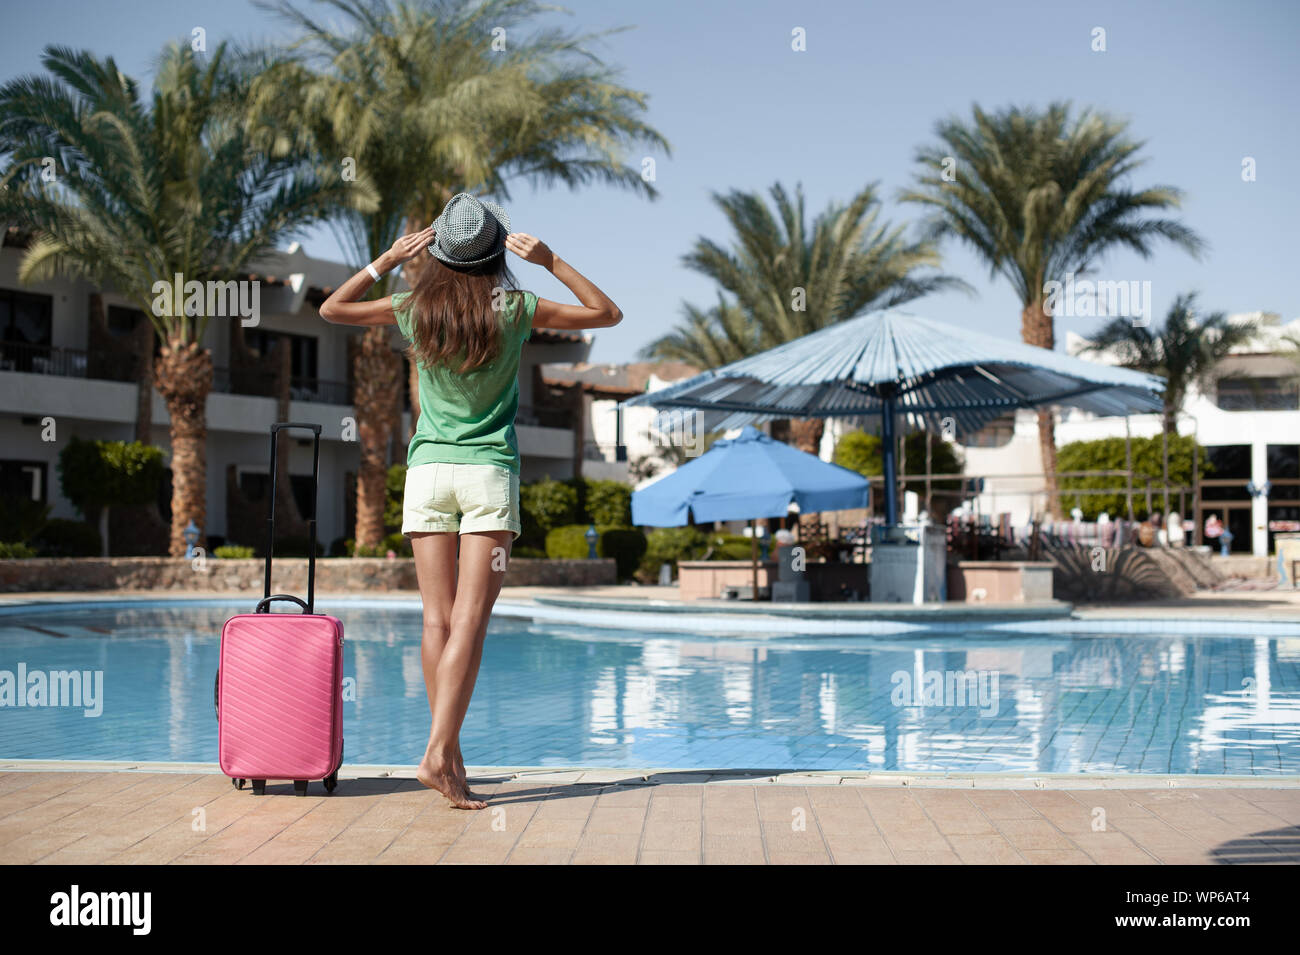 Travel, summer holidays and vacation concept - Beautiful woman walking near hotel pool area with pink suitcase Stock Photo